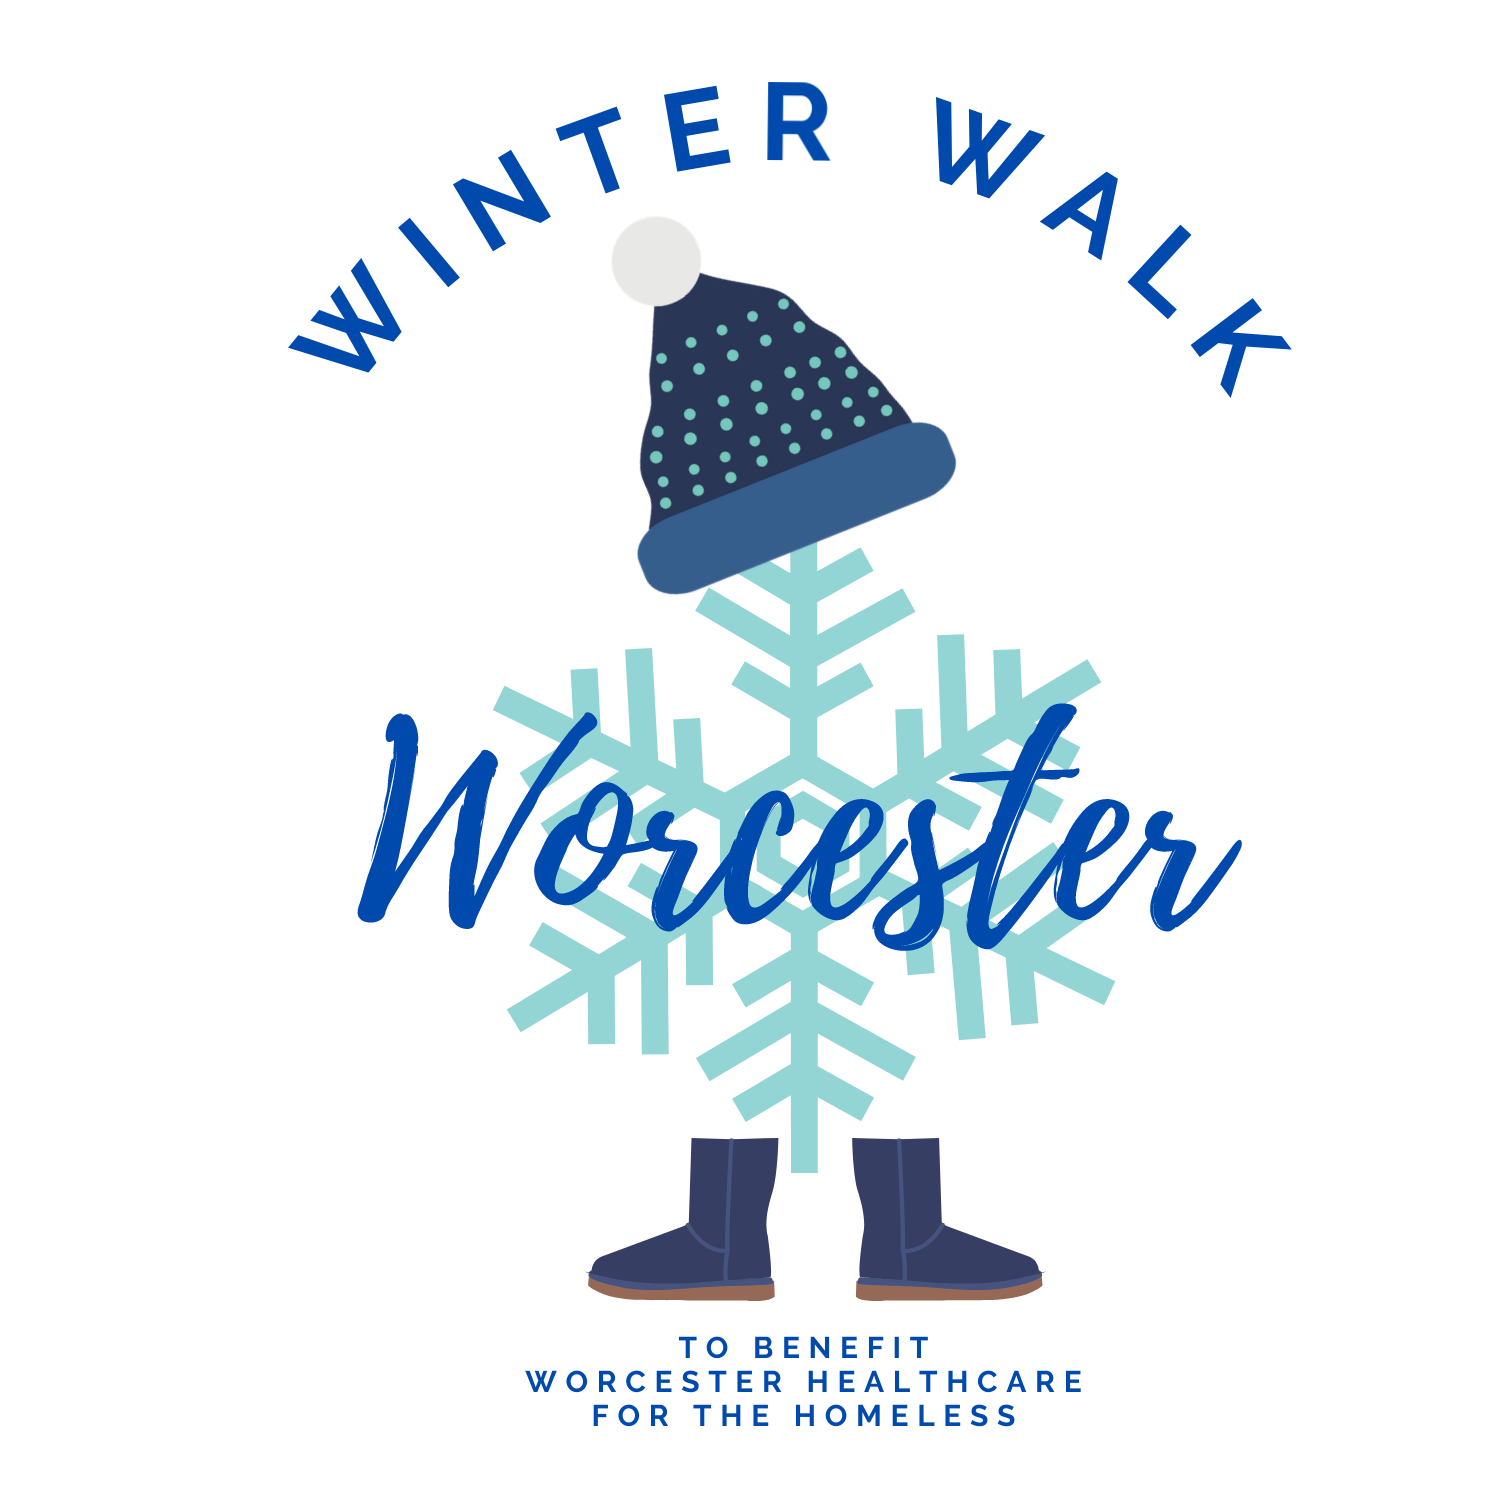 Worcester Health Care for the Homeless, a program of Family Health Center of Worcester, Inc.